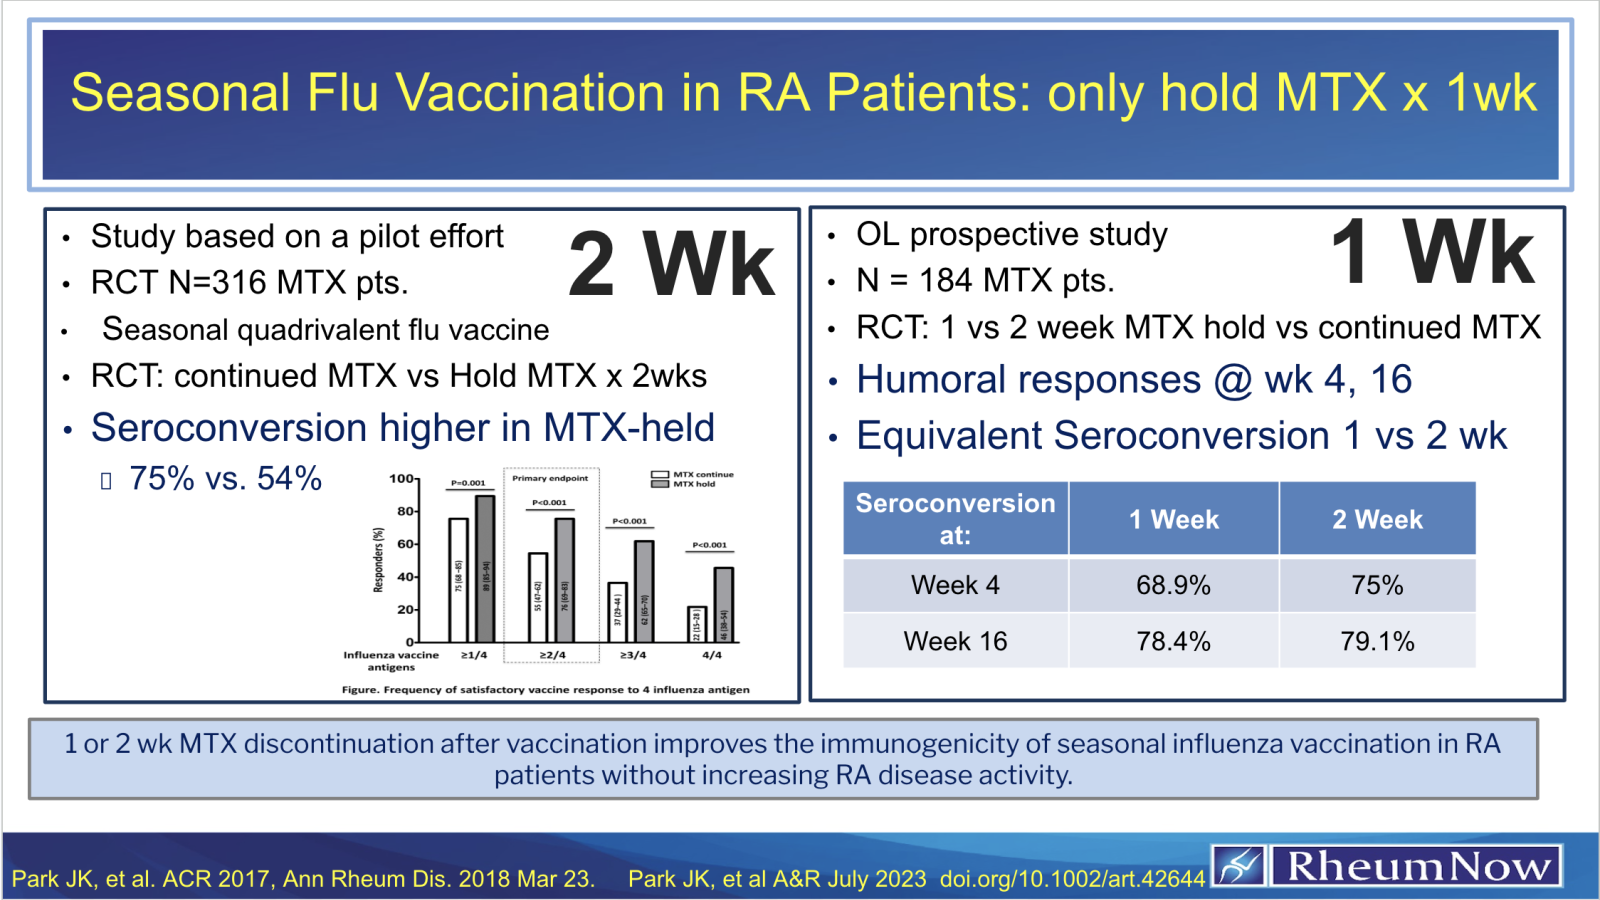 Flu Vax in RA Patients Cover Image